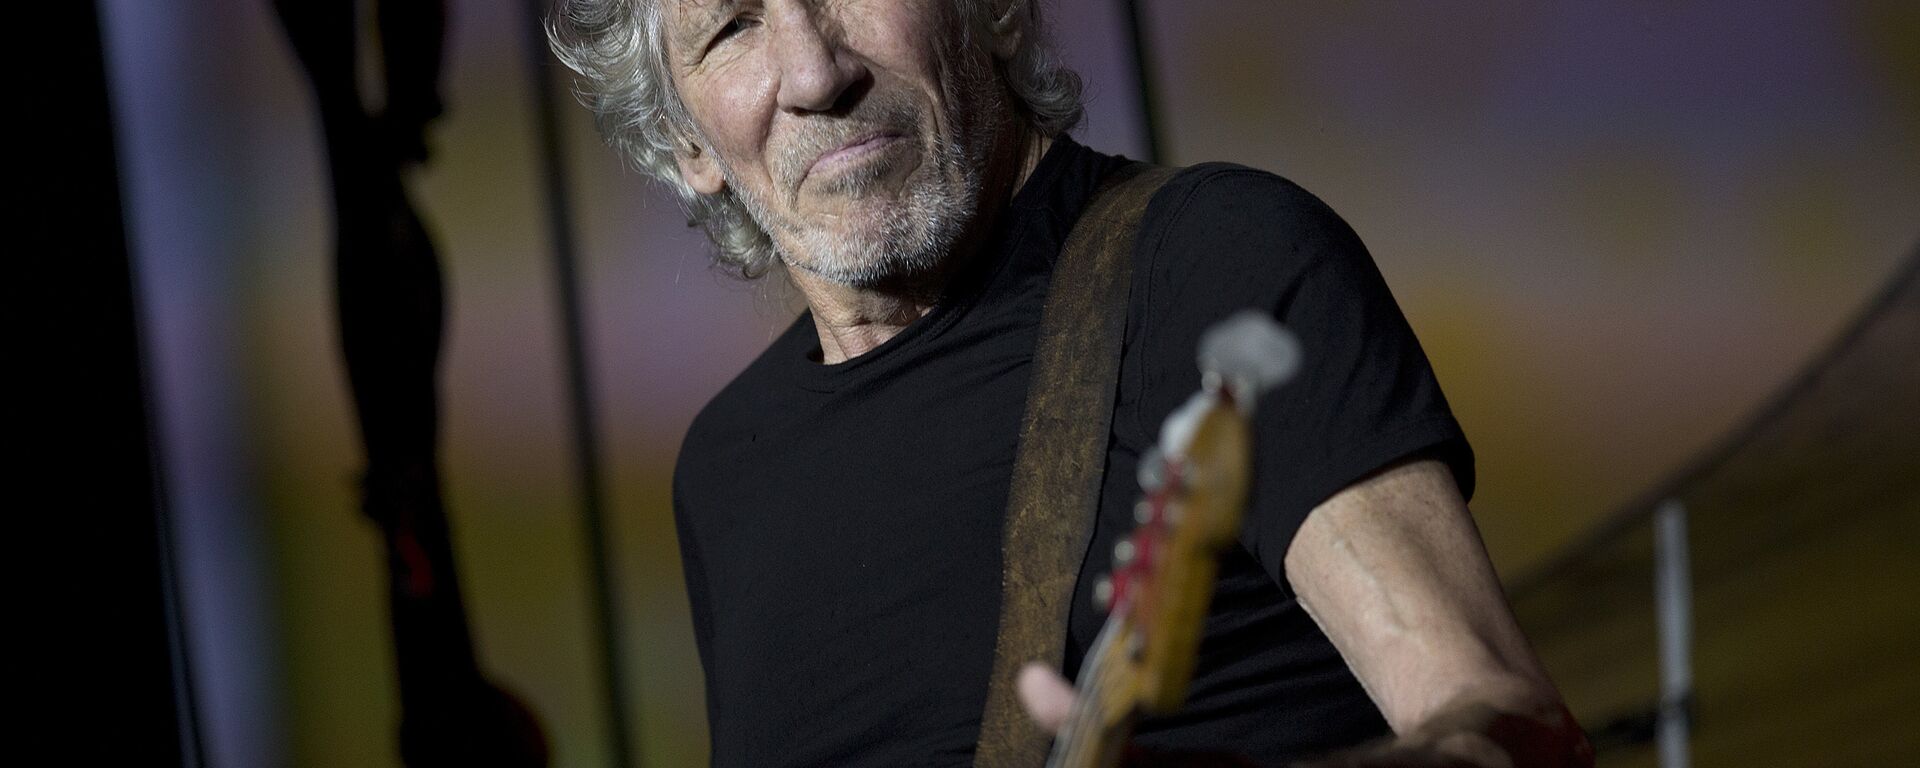 British singer and songwriter Roger Waters performs during his concert of the Us+Them tour at Maracana stadium, Rio de Janeiro, Brazil, Wednesday, Oct. 24, 2018 - Sputnik International, 1920, 07.08.2022